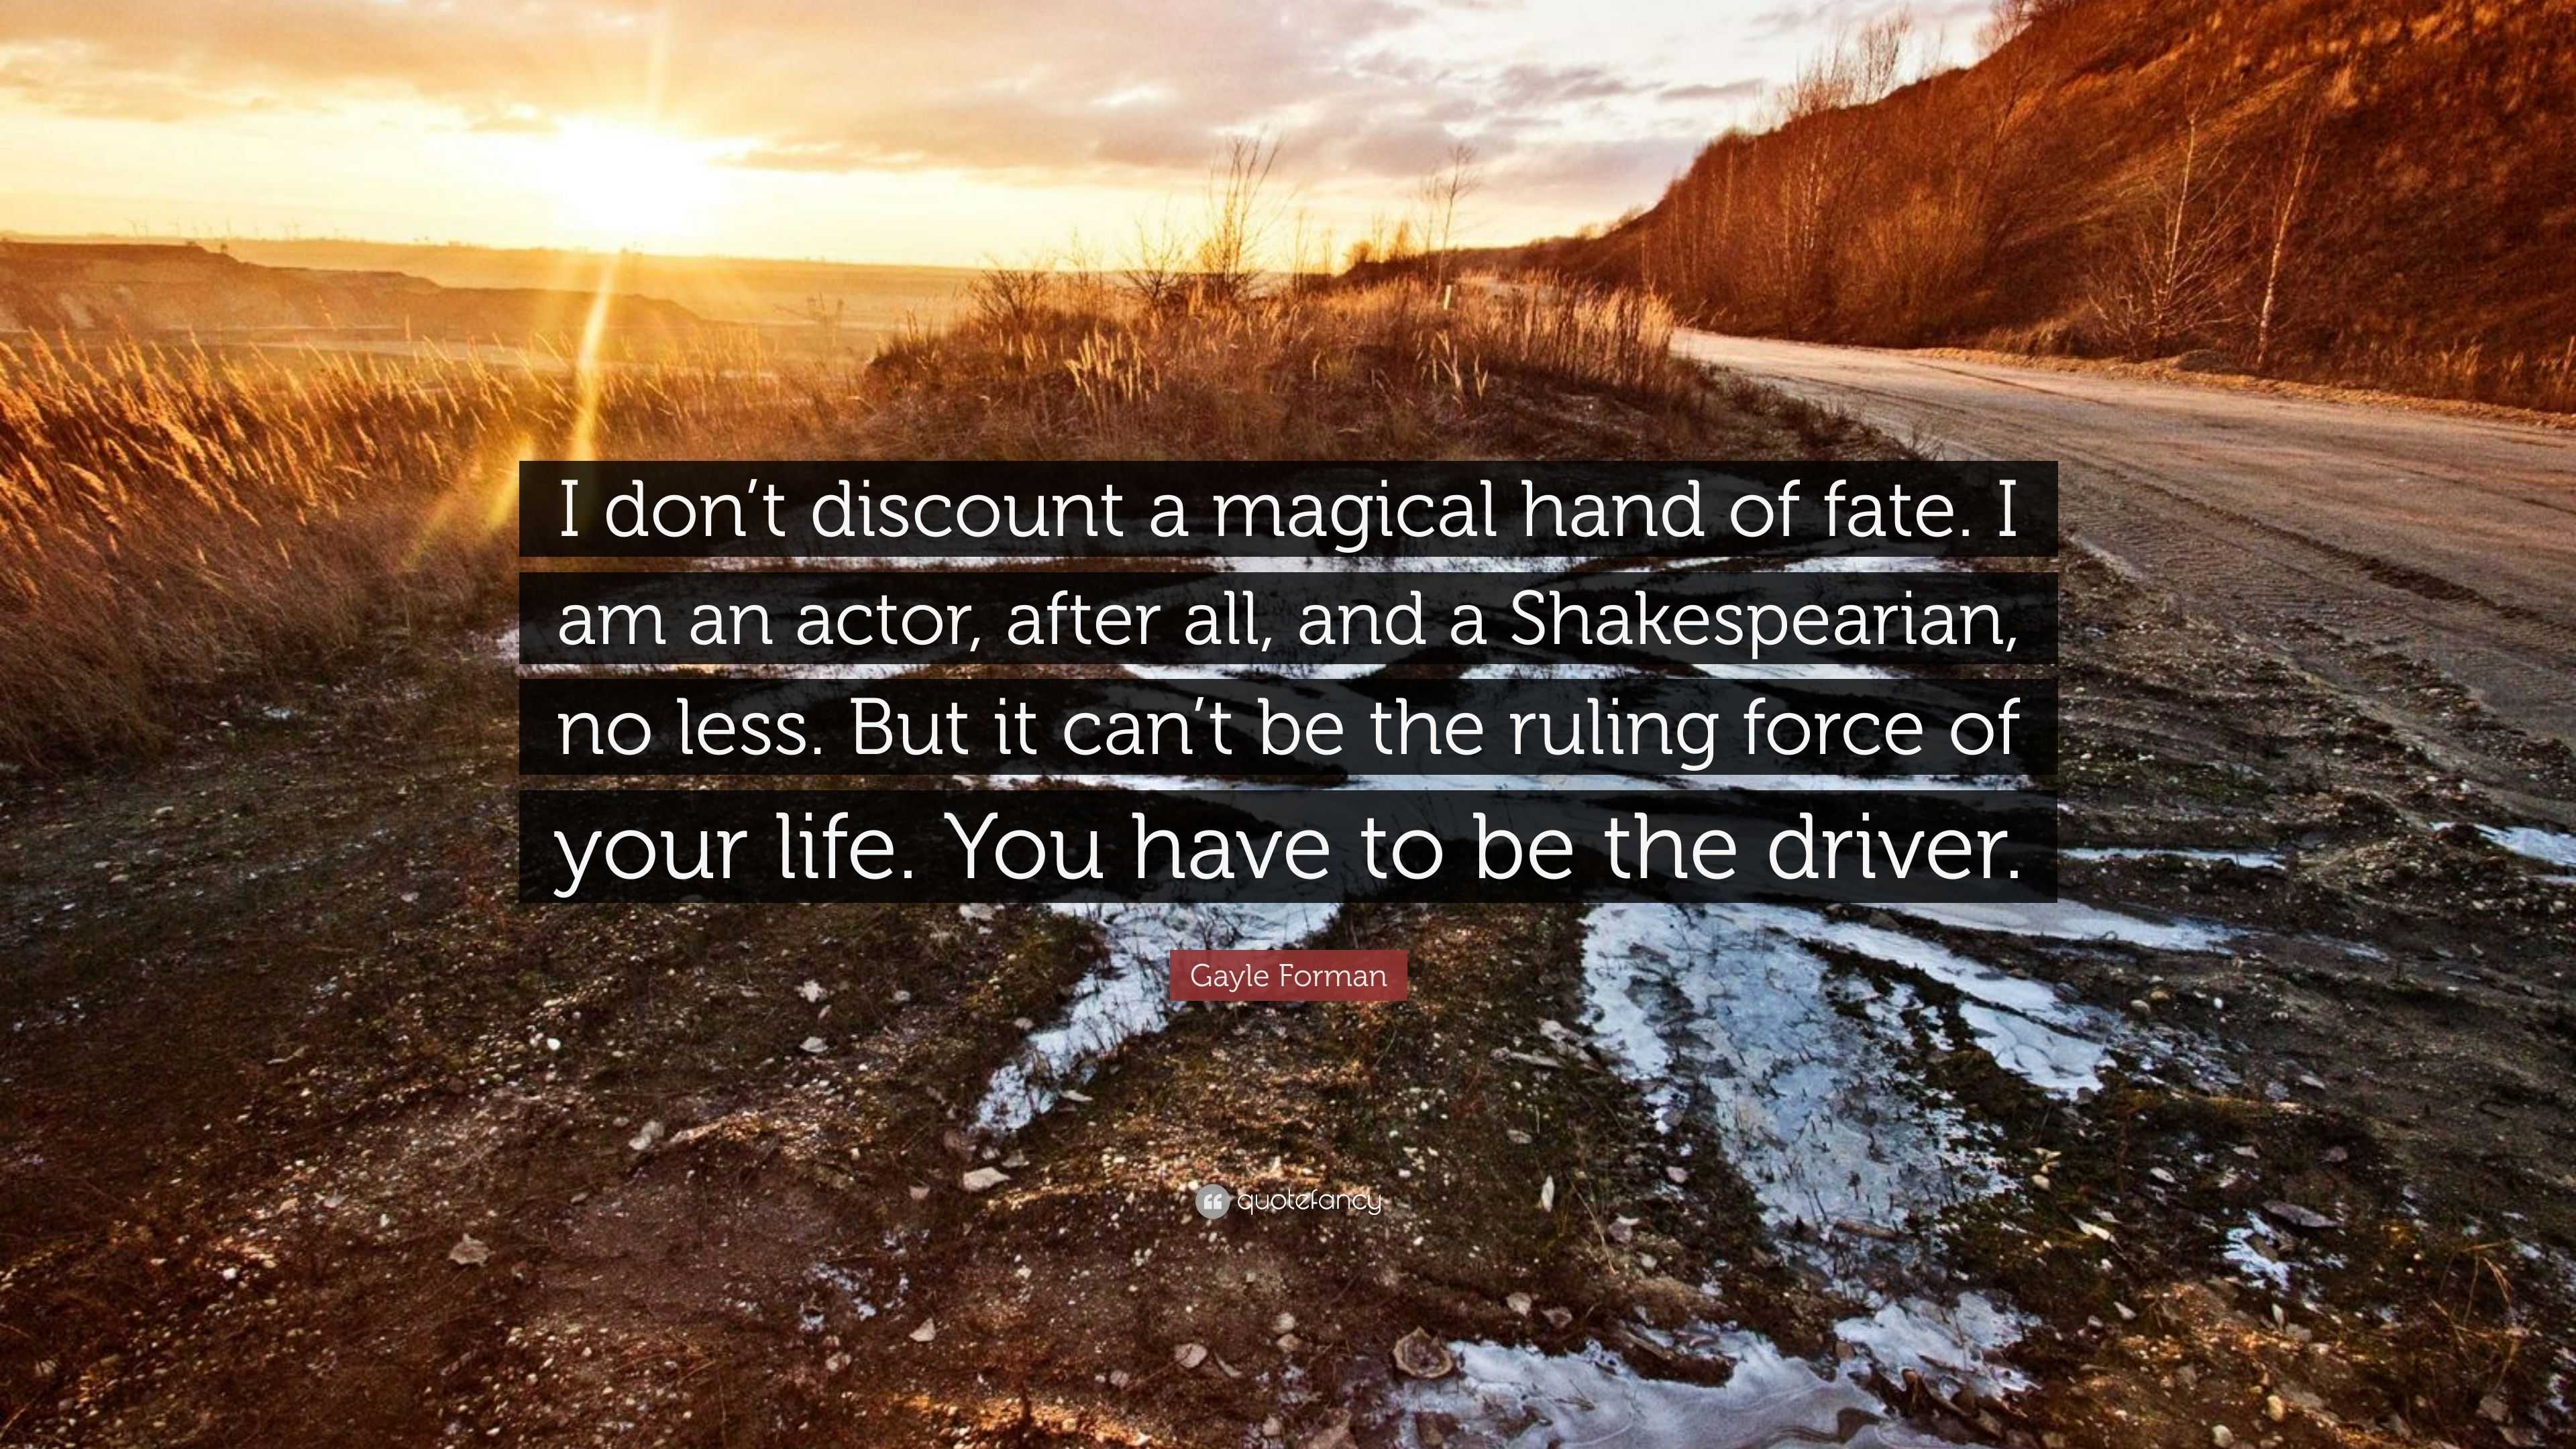 Gayle Forman Quote “I don t discount a magical hand of fate